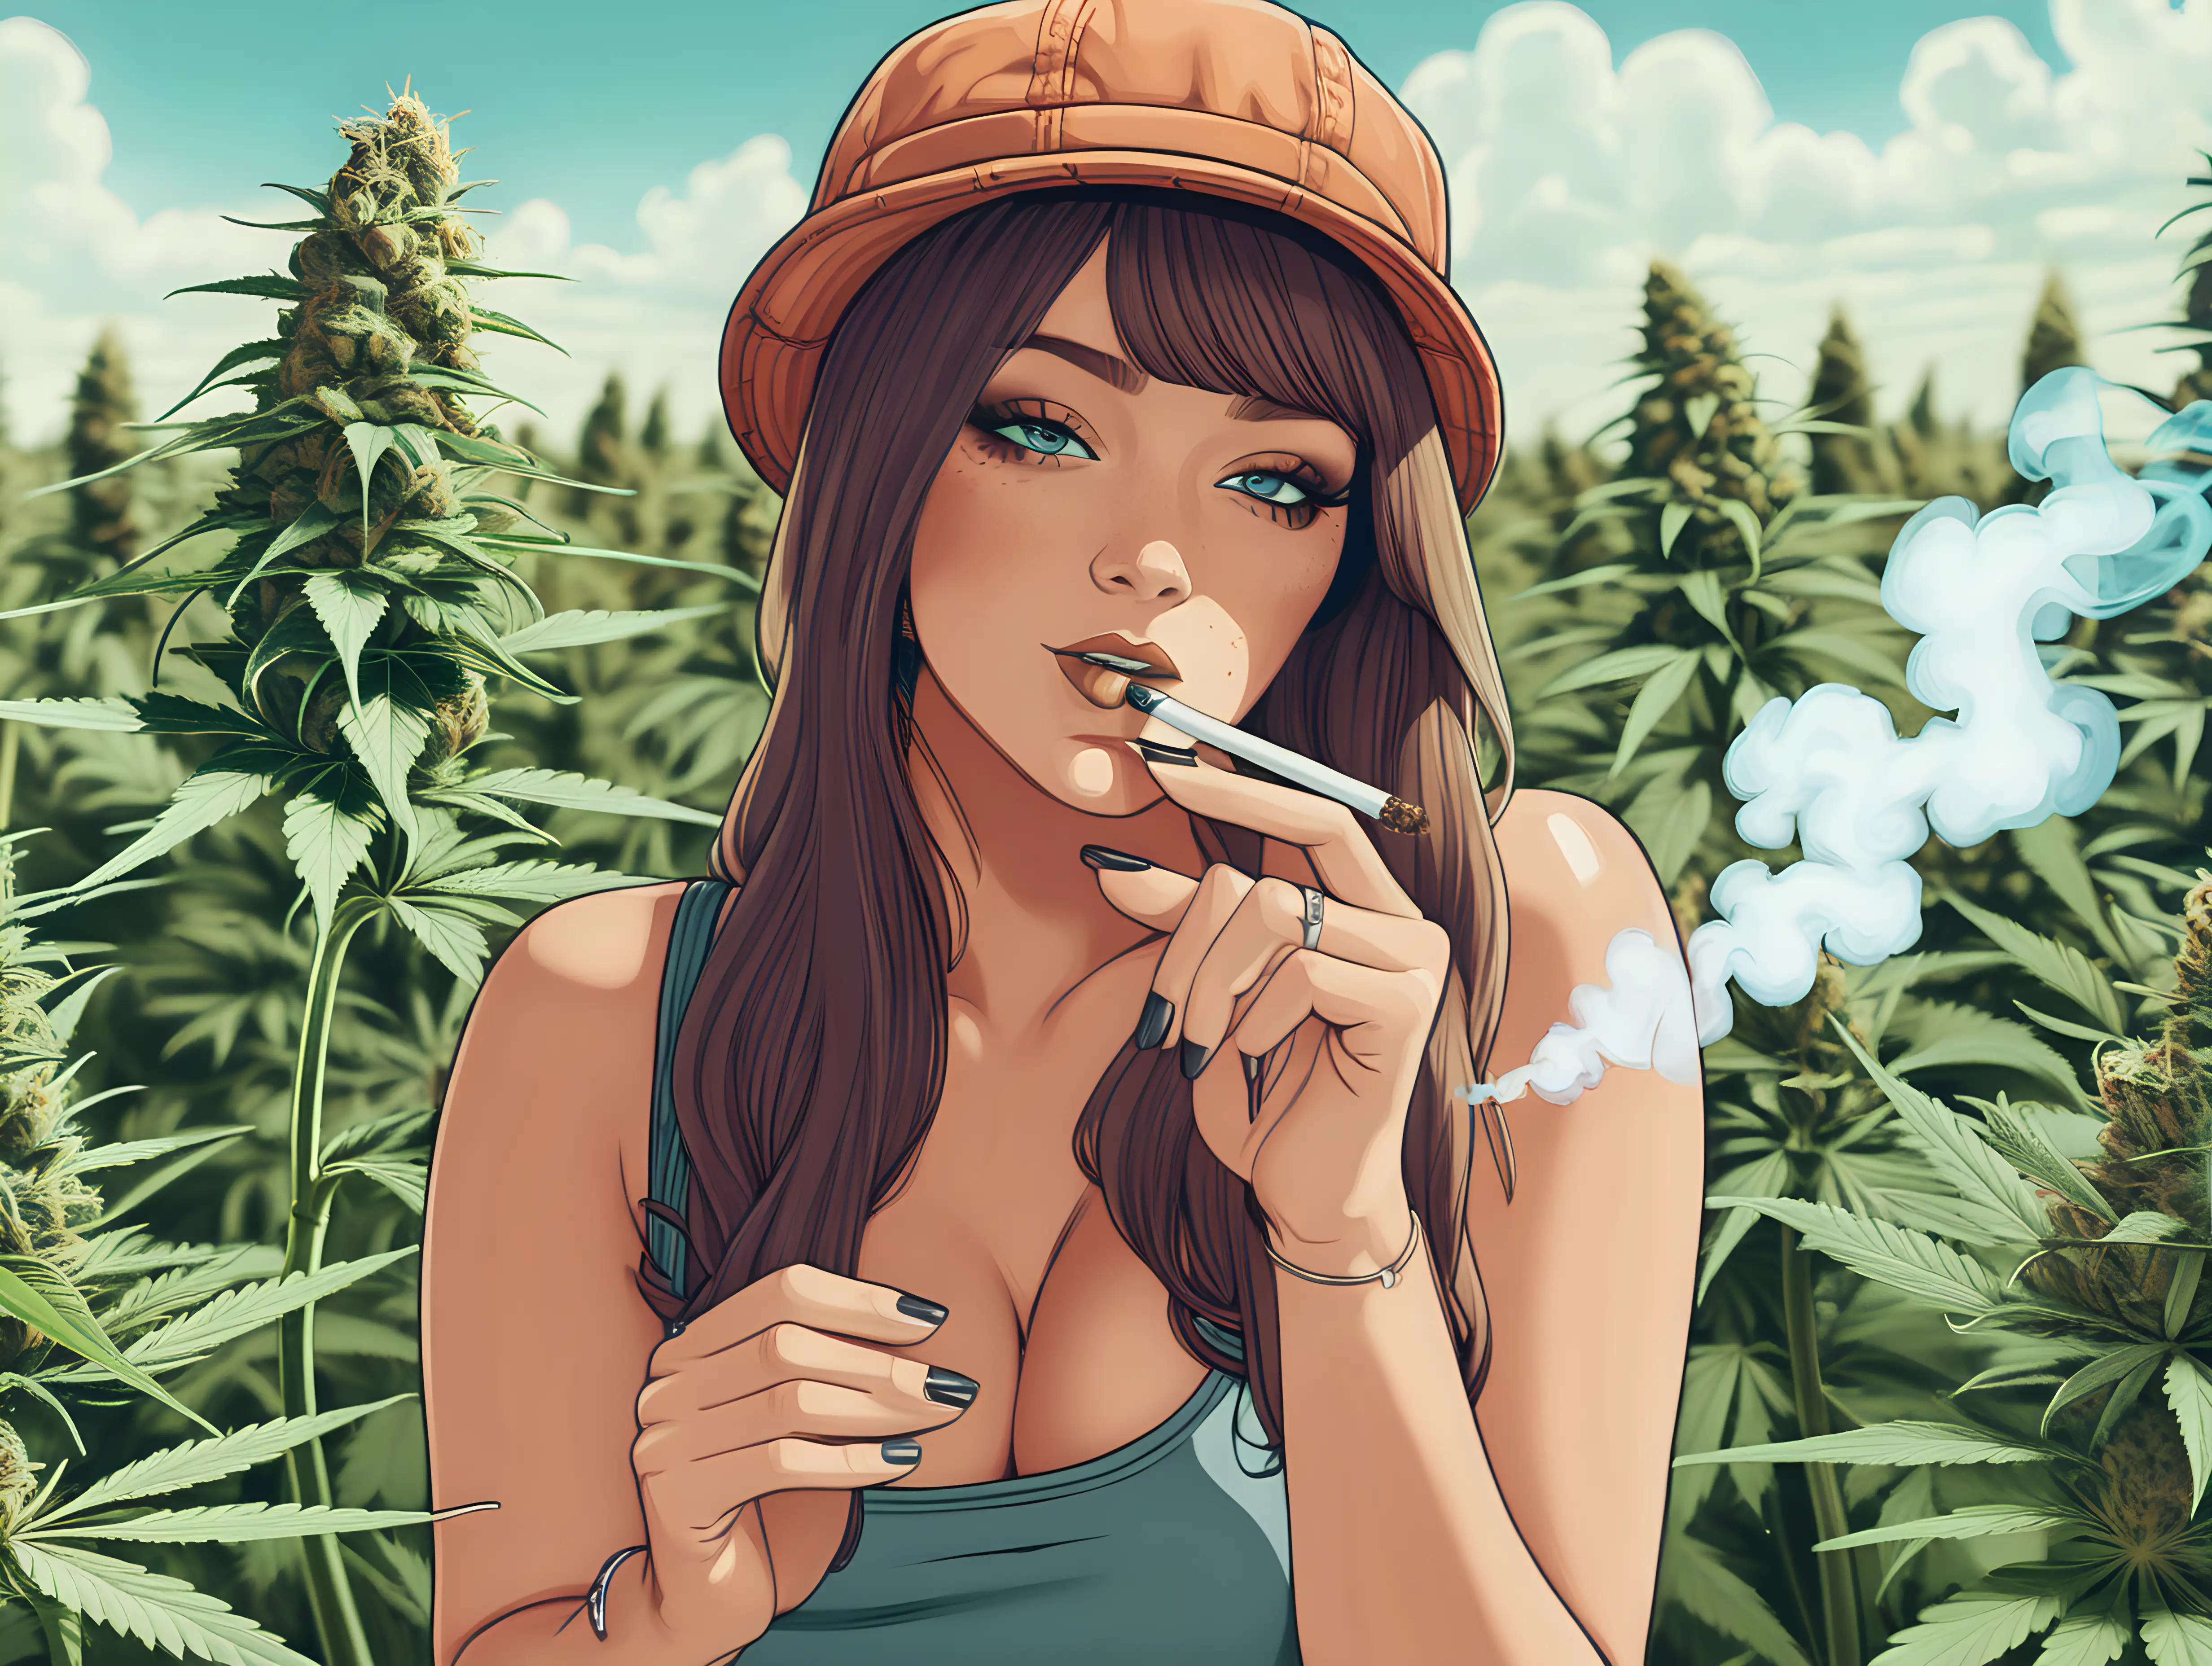 Sexy Woman smoking a joint in a field of cannabis





